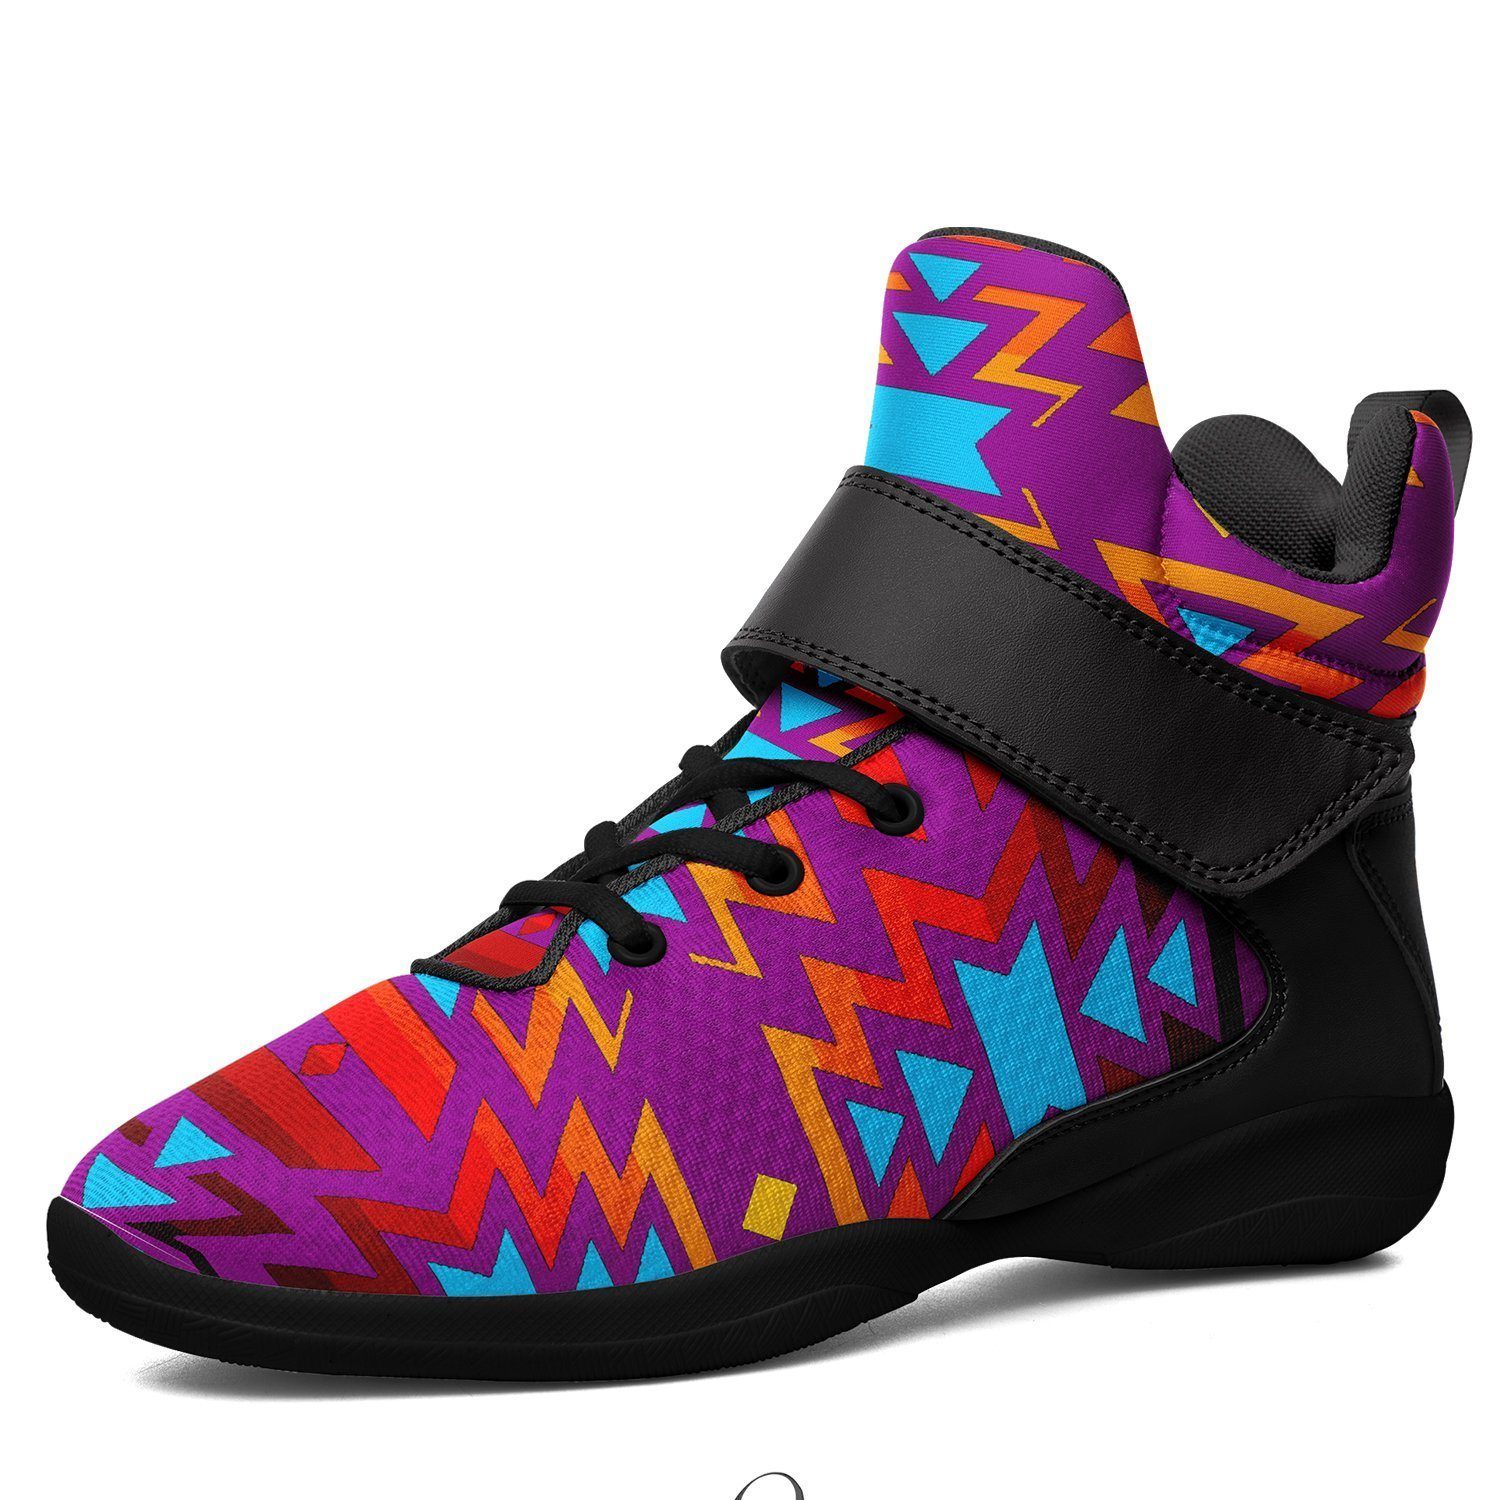 Fire Colors and Turquoise Purple Kid's Ipottaa Basketball / Sport High Top Shoes 49 Dzine US Child 12.5 / EUR 30 Black Sole with Black Strap 